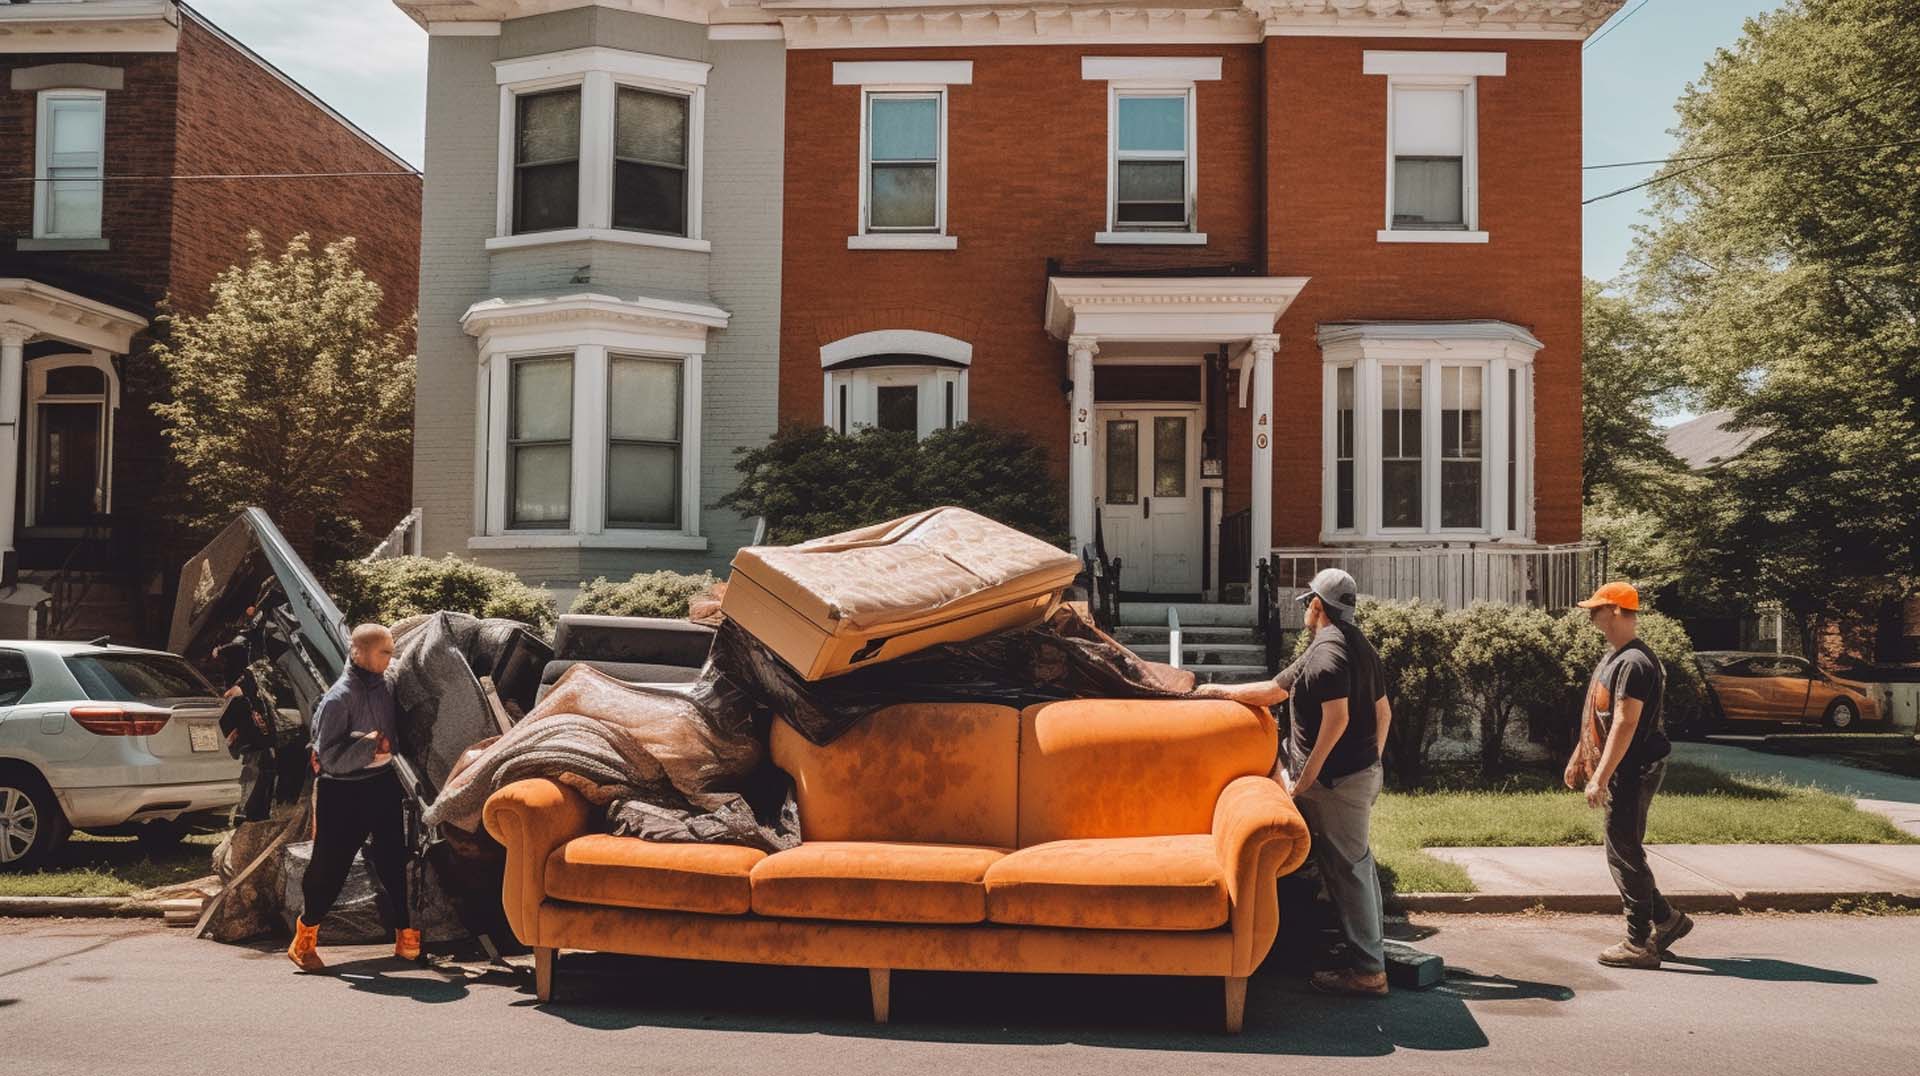 How to Find a Reputable Junk Removal Company in Trenton, Ontario